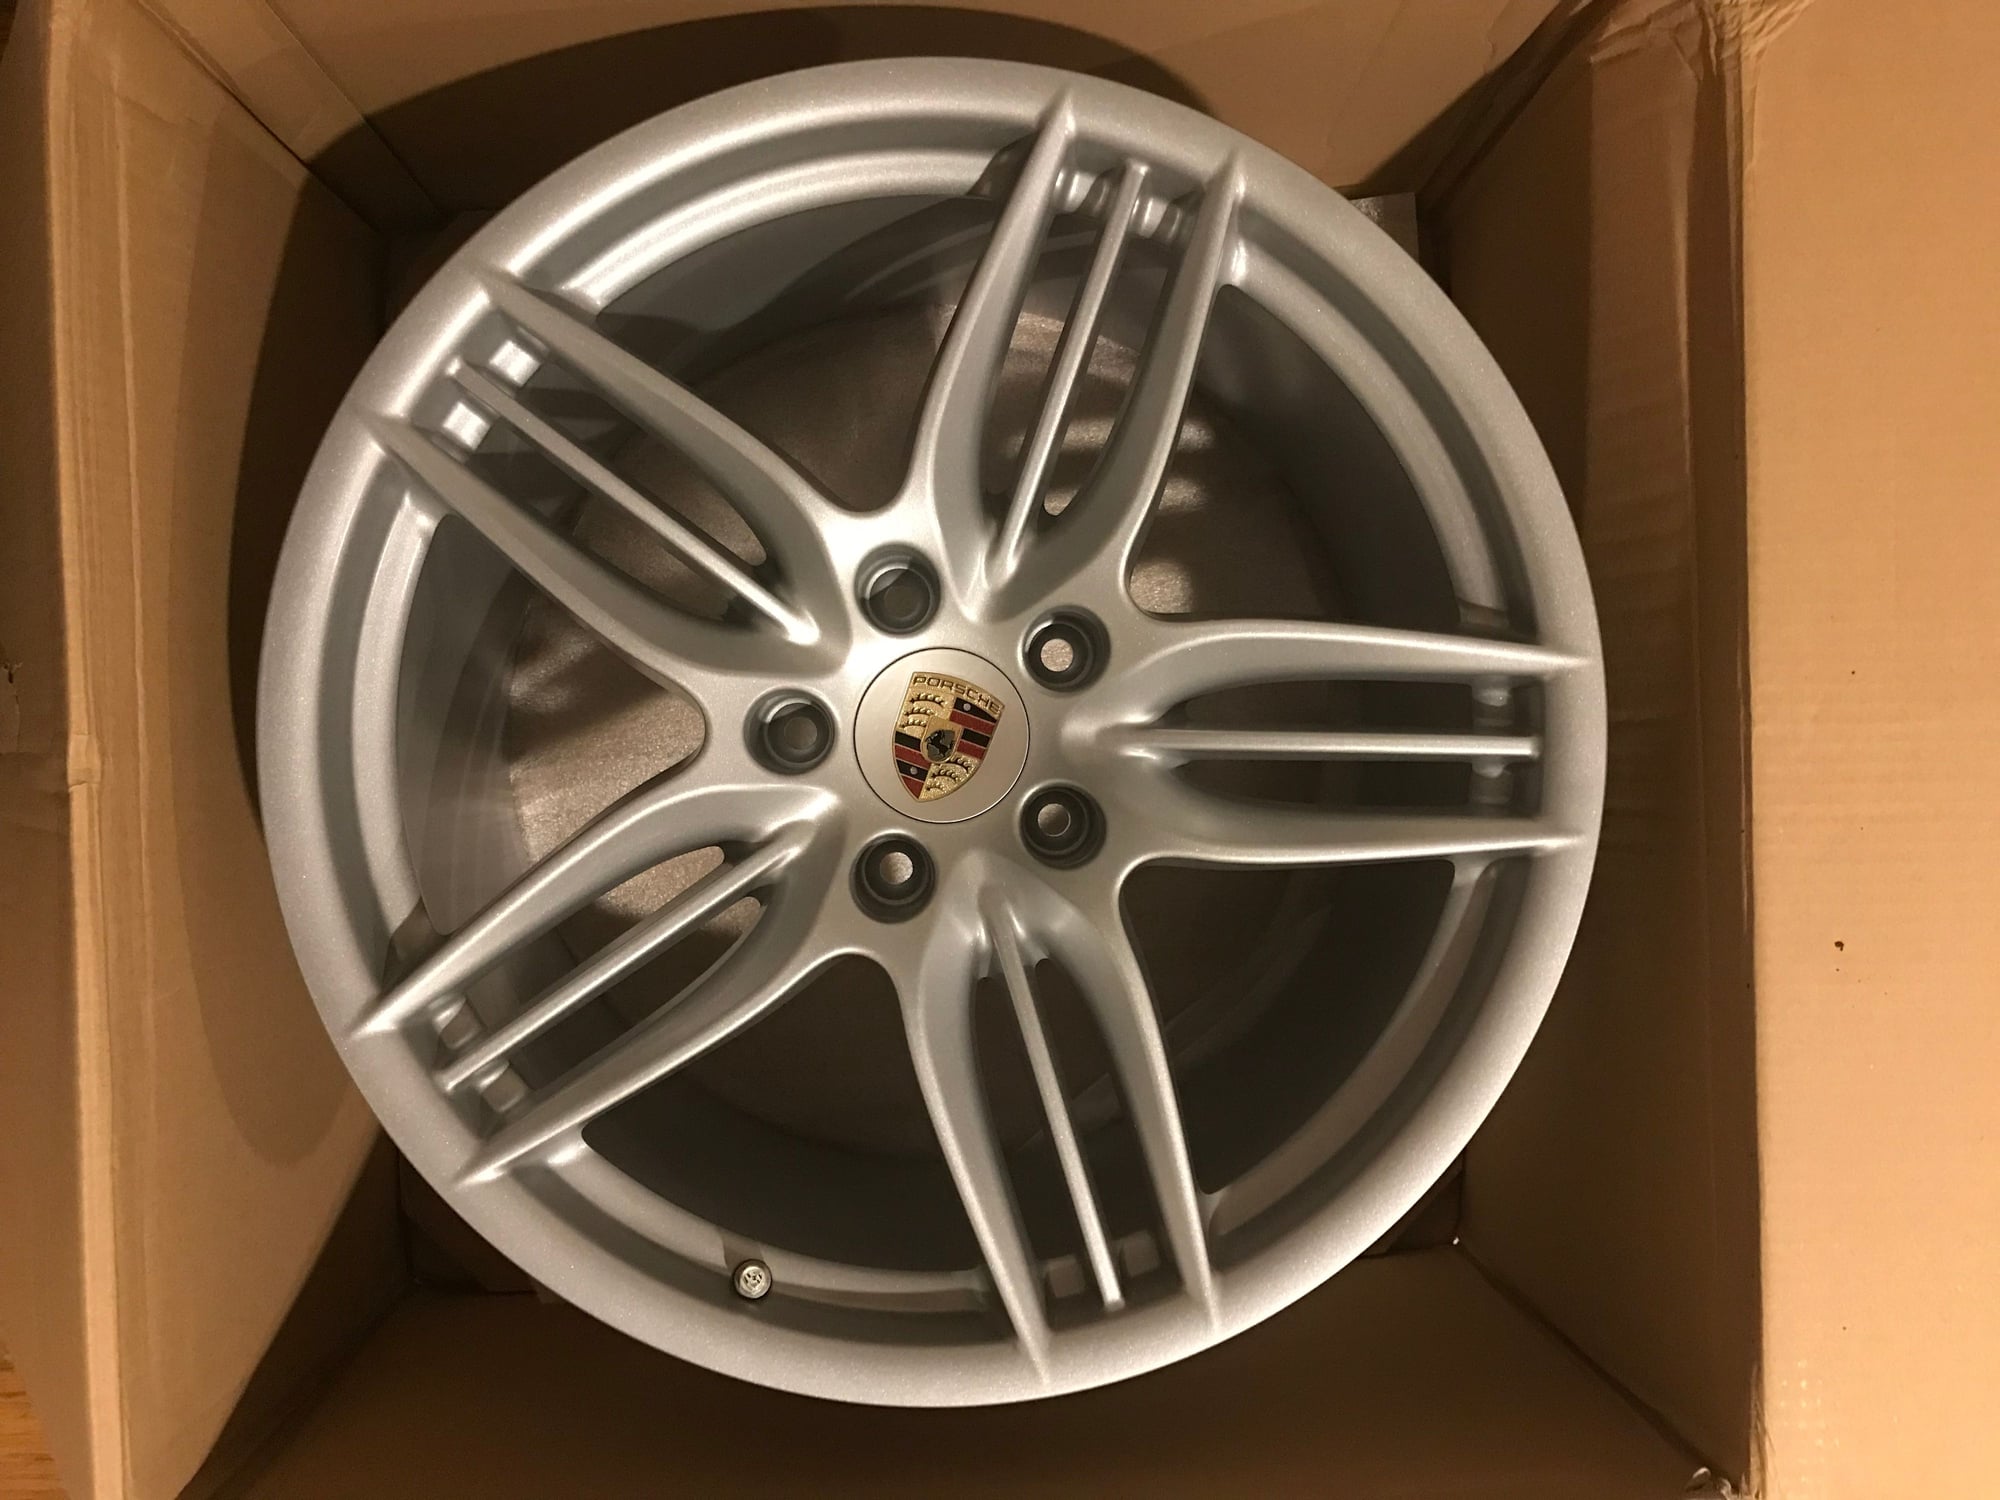 Wheels and Tires/Axles - Newly refinished 991 Sport Design II wheels - Used - 2013 to 2016 Porsche 911 - Minneapolis, MN 55416, United States